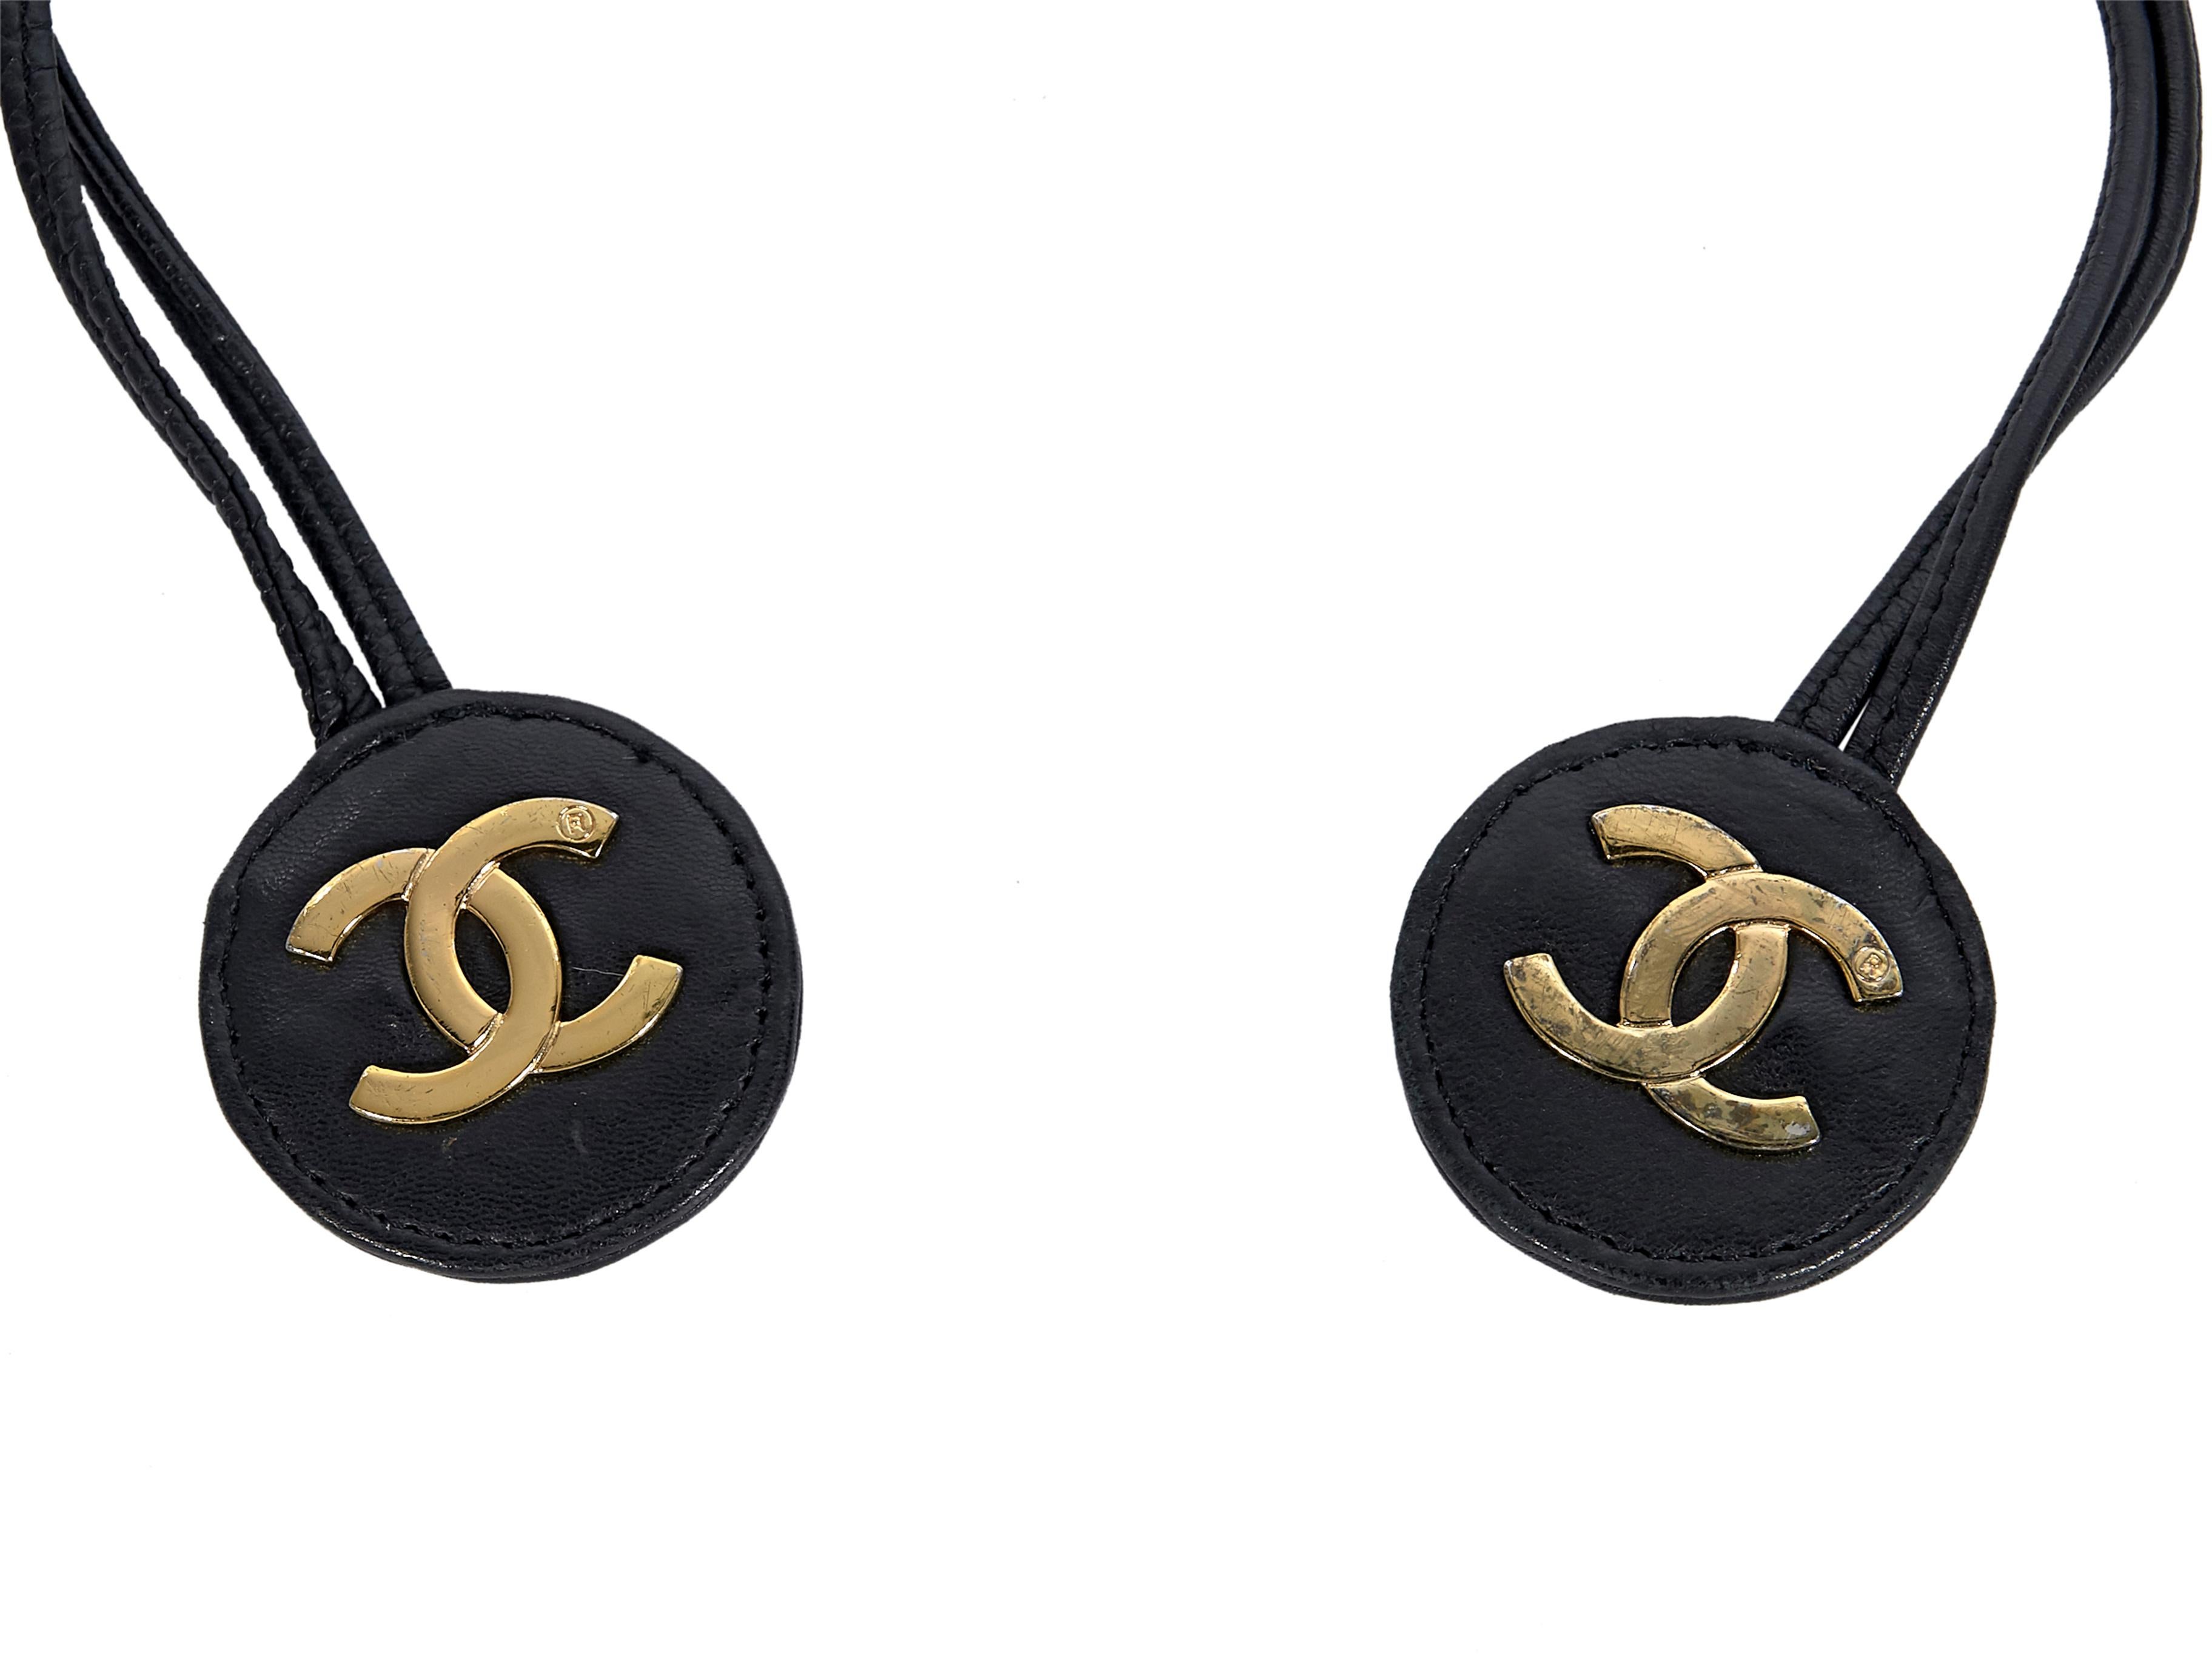 Product details:  Black woven leather and chain belt by Chanel.  Self-tie closure.  Goldtone hardware.  34.5